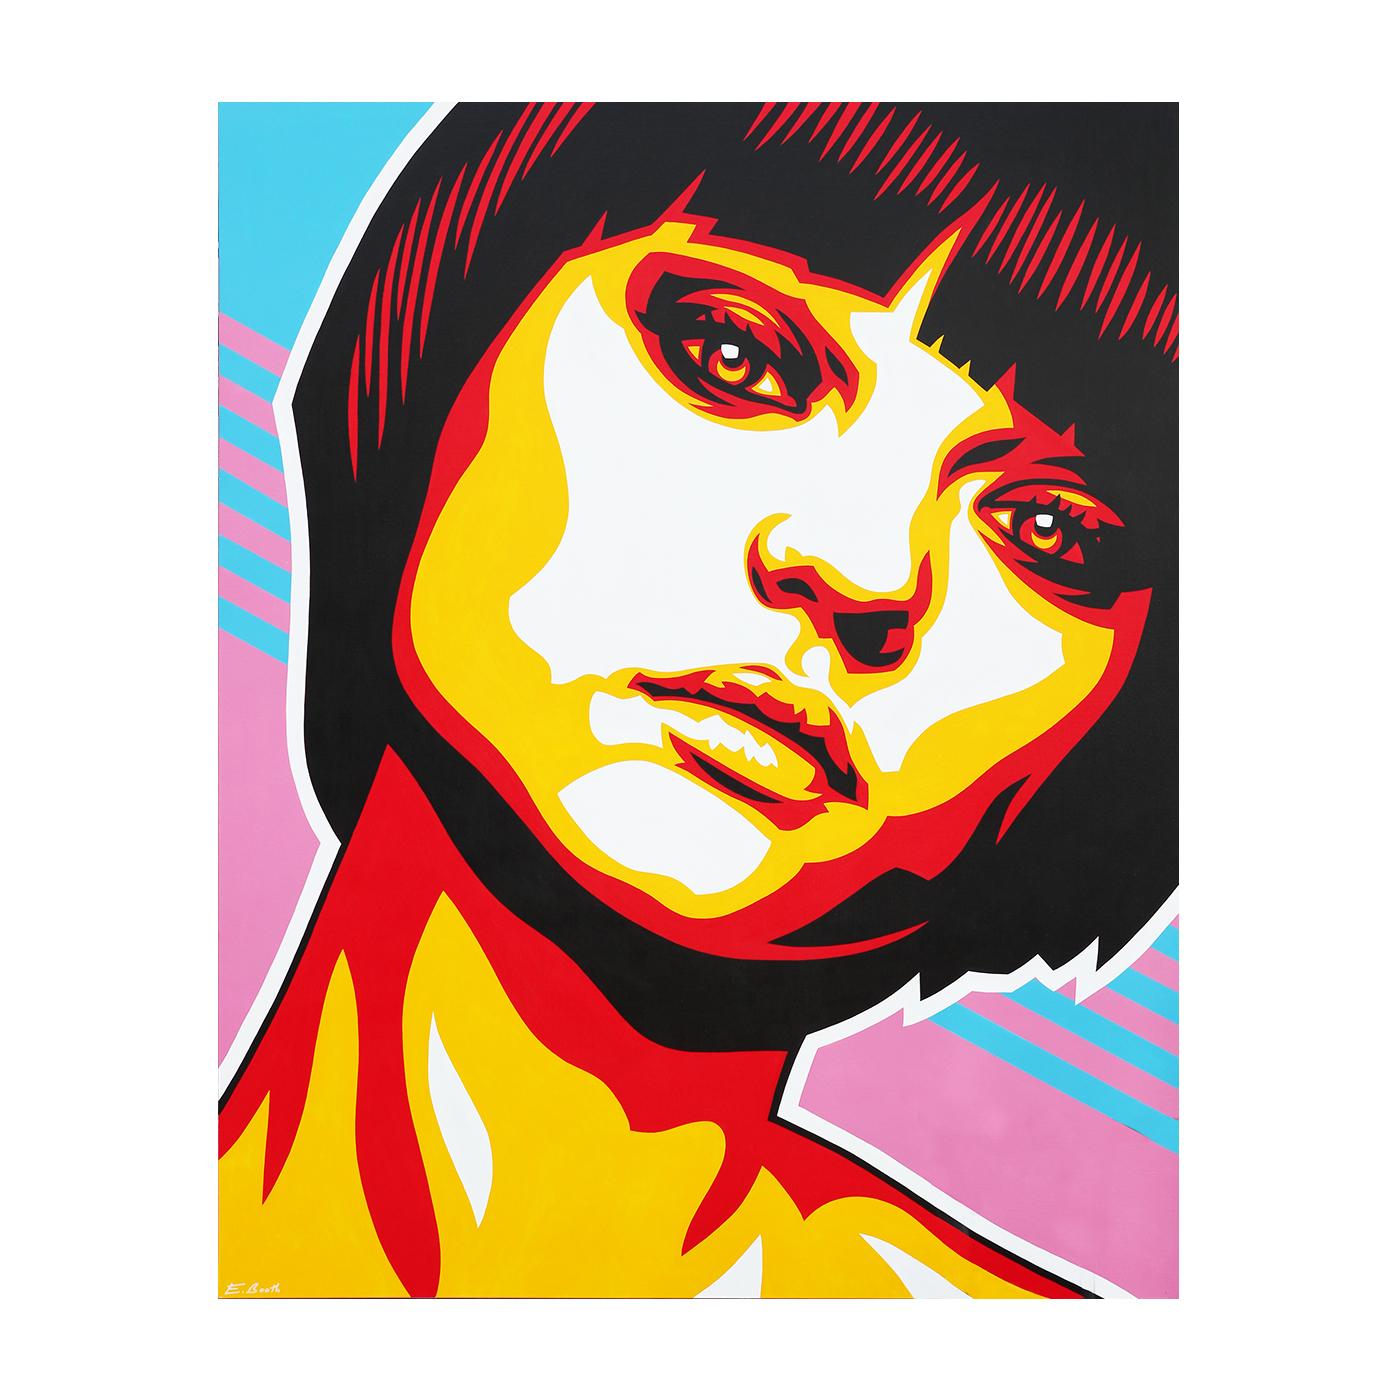 “Might and Mercy” Blue, Red, Yellow, and Pink Toned Abstract Vectorized Portrait - Painting by Ed Booth